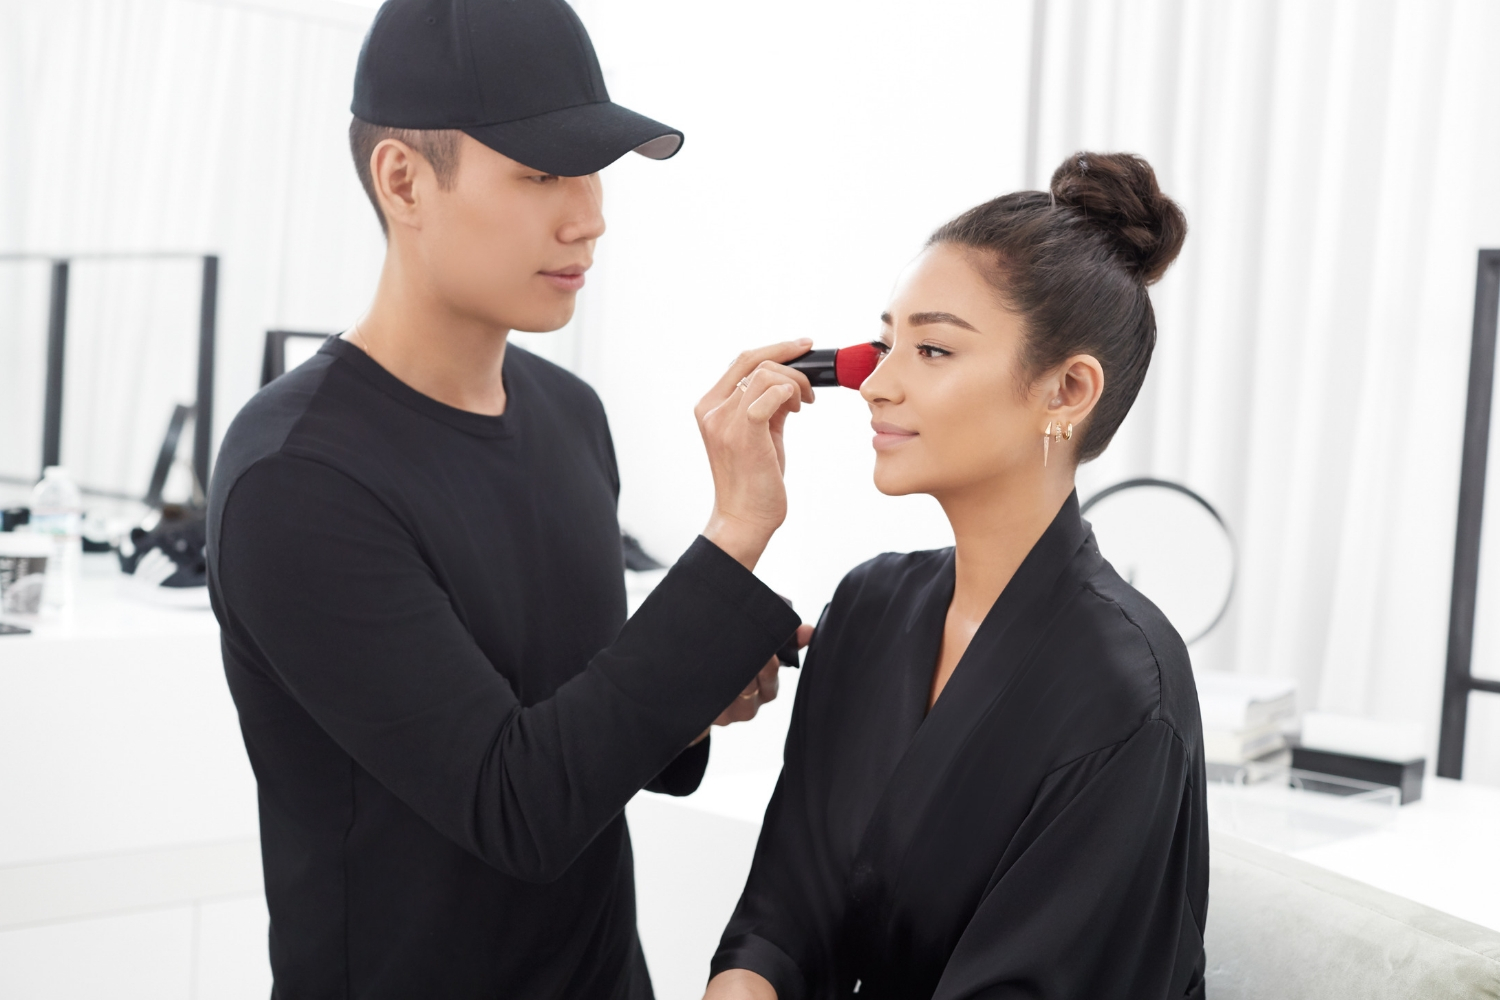 Celebrity make-up artist Patrick Ta on how to get glowing skin